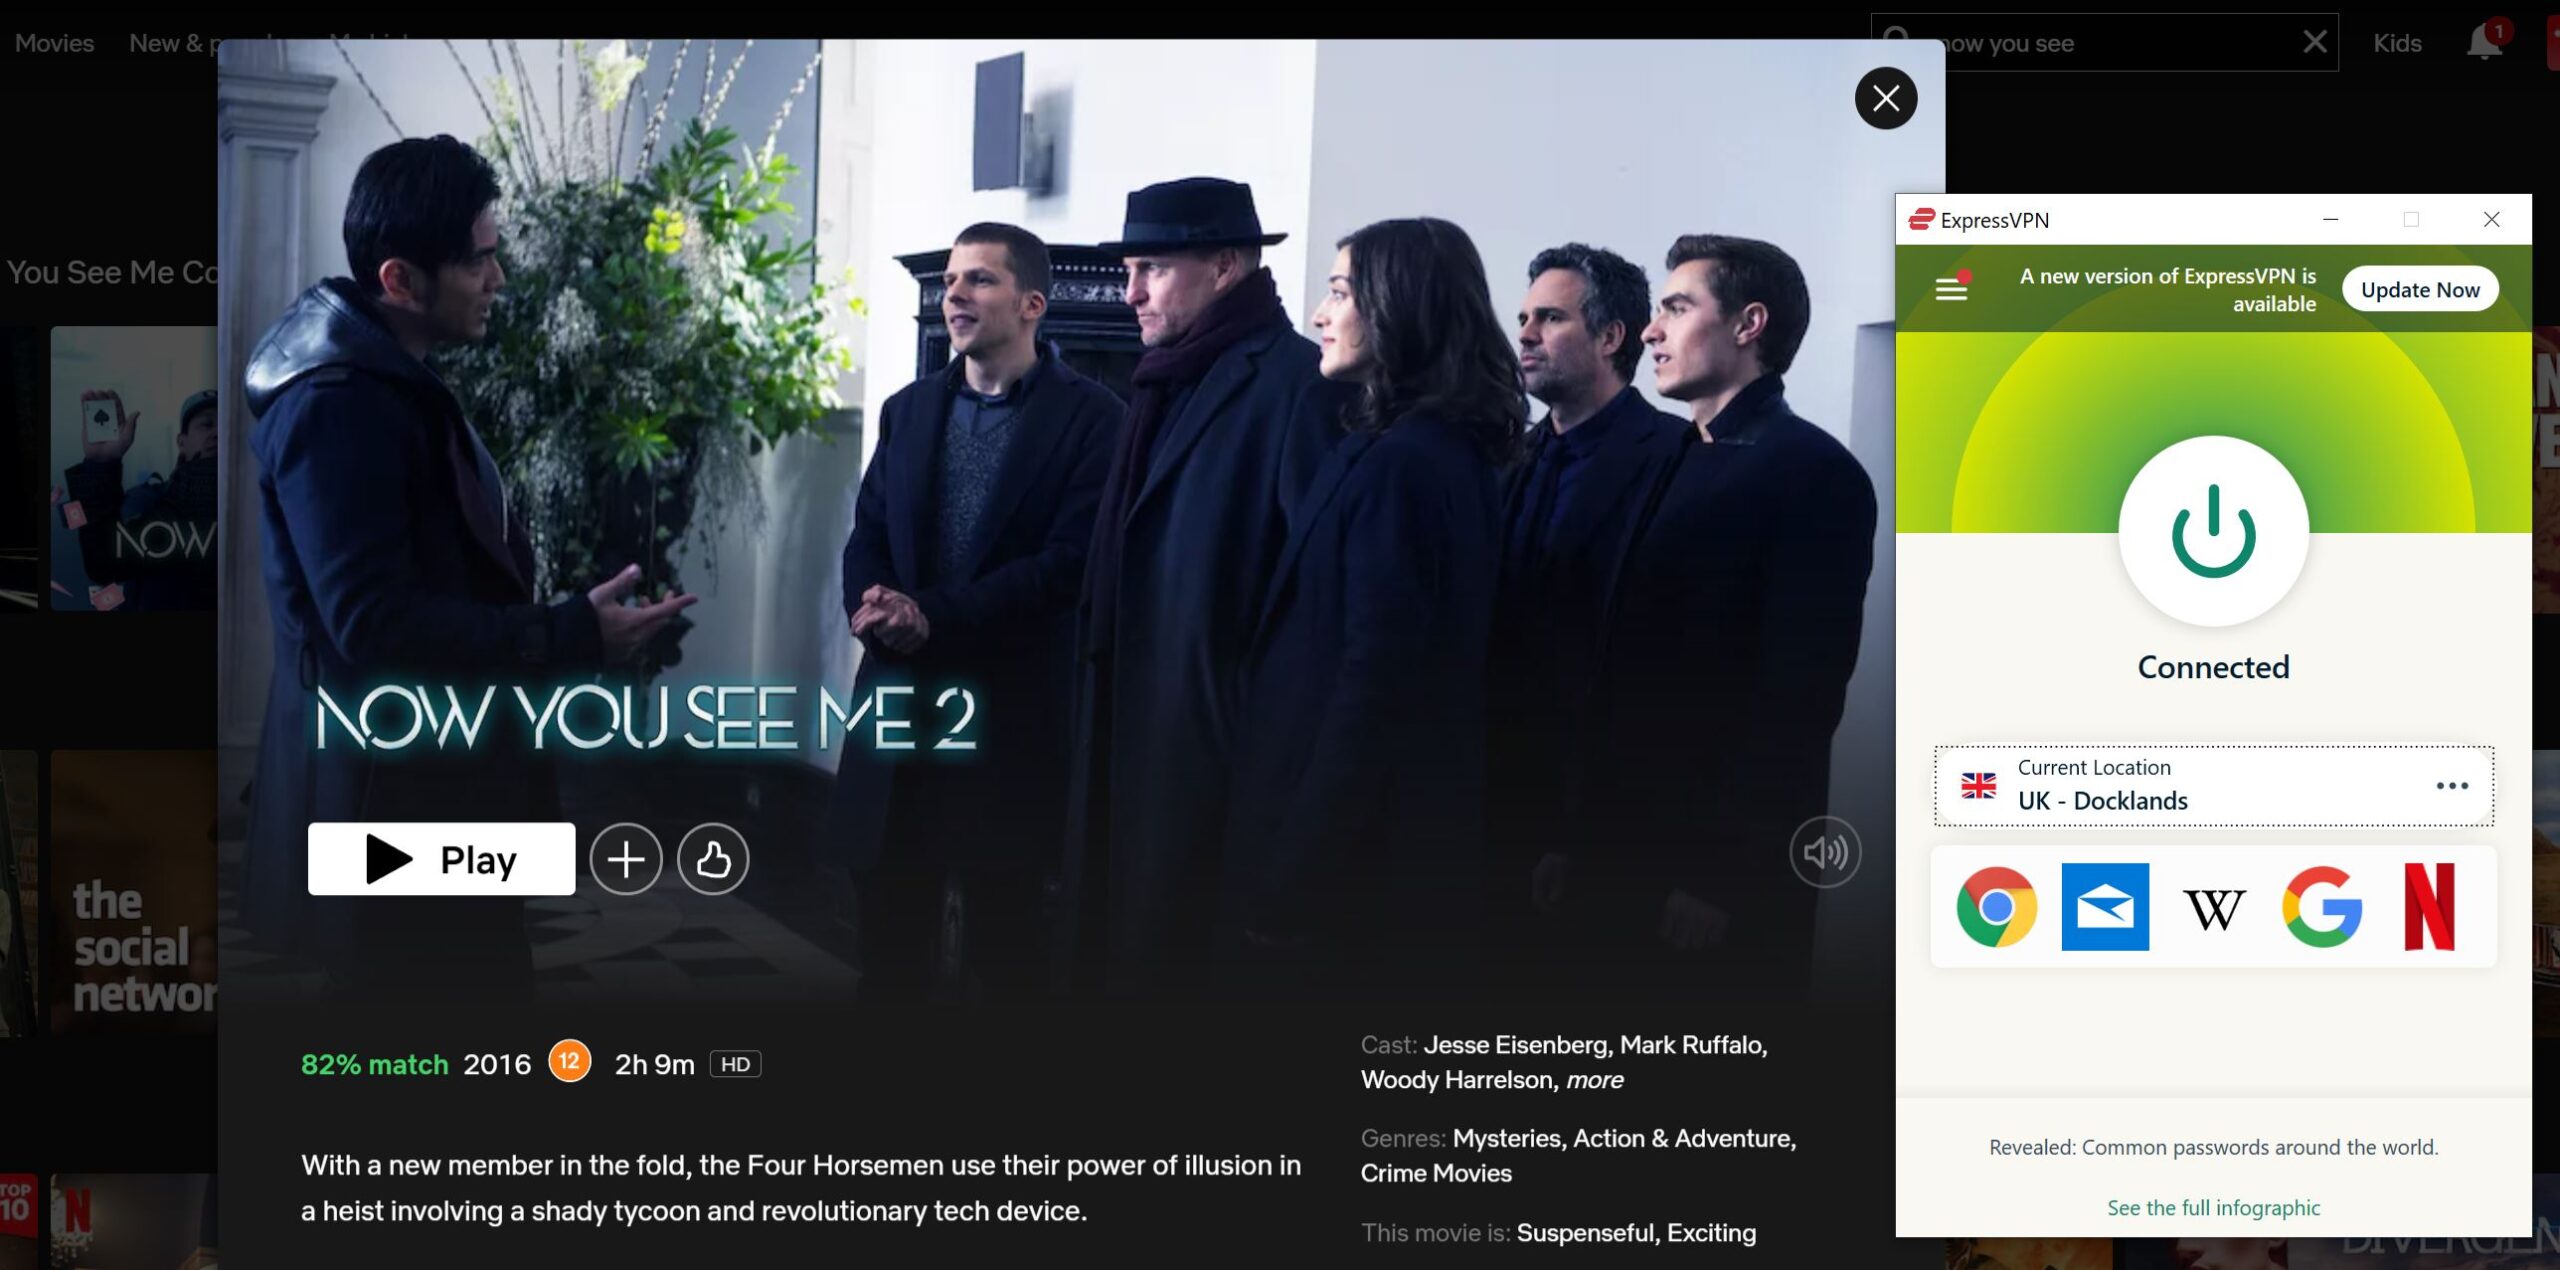 Watch Now You See Me 2 on Netflix